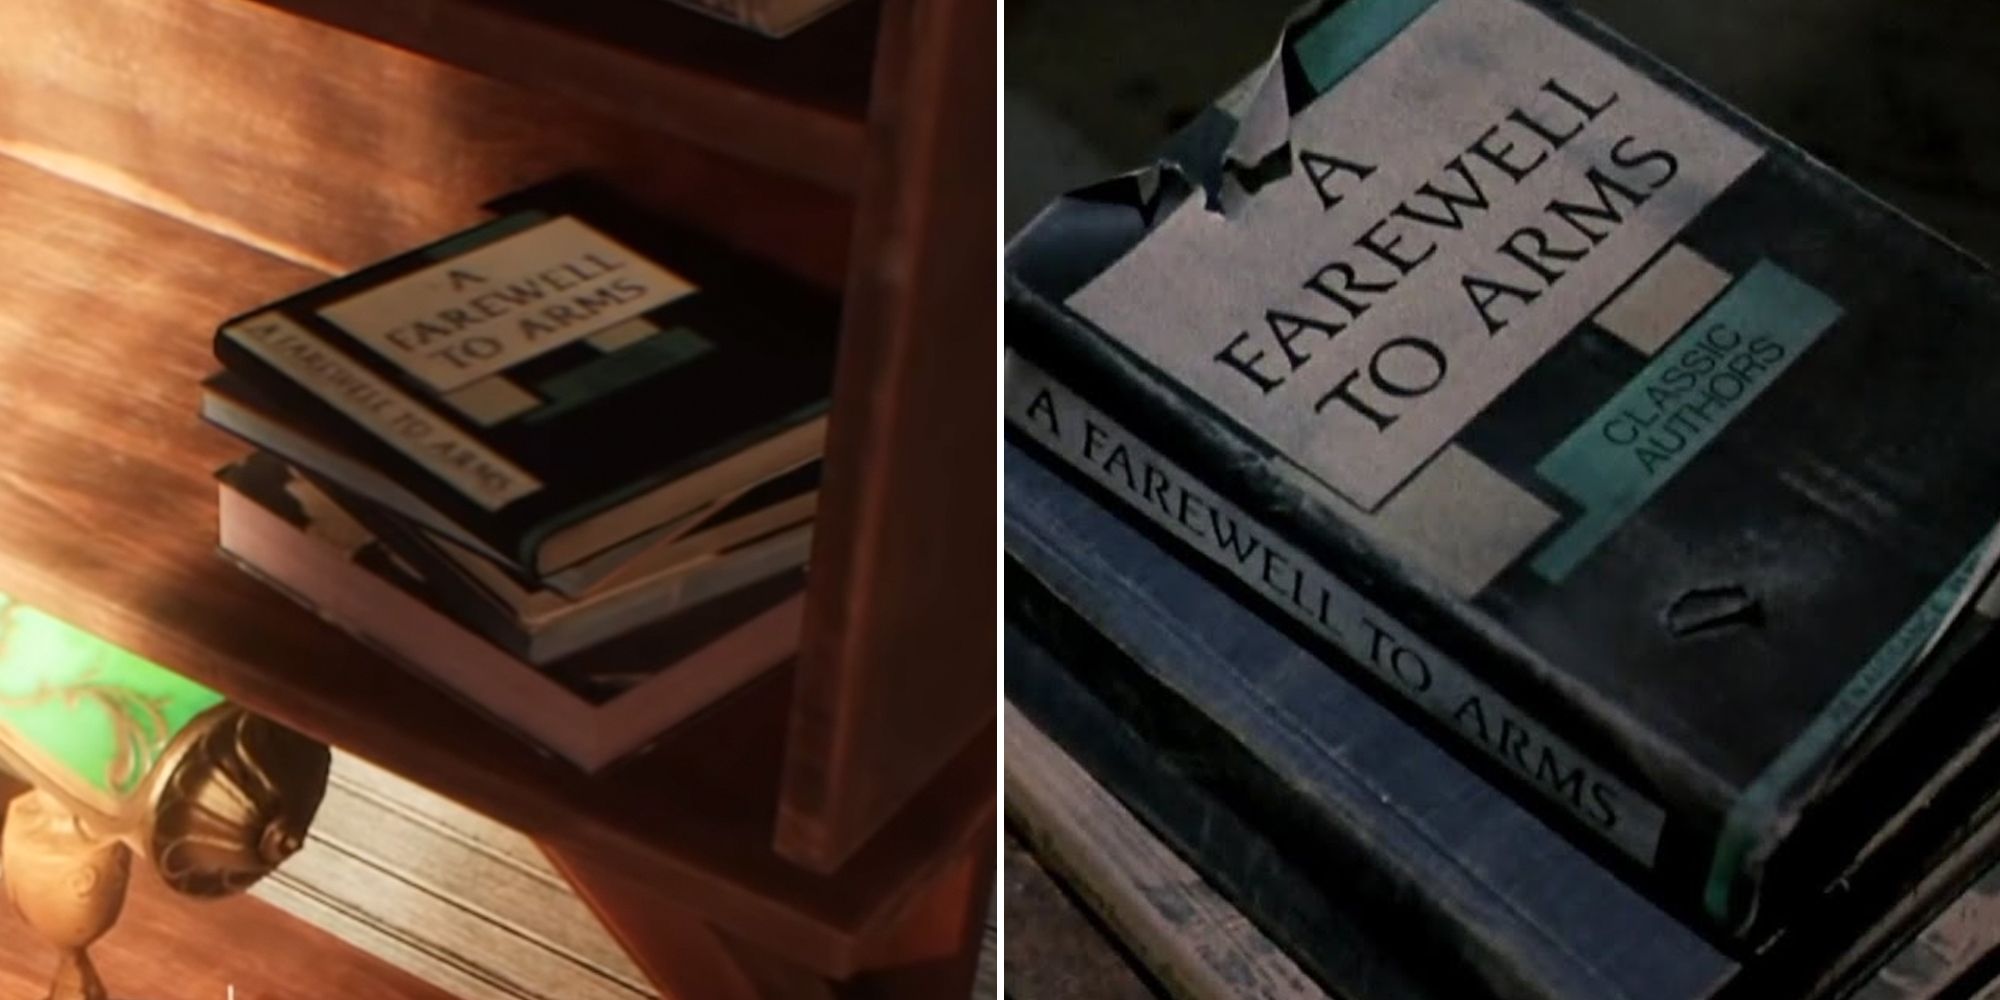 Evil Dead The Game split image. A Farewell to Arms book in game and Evil Dead 2.